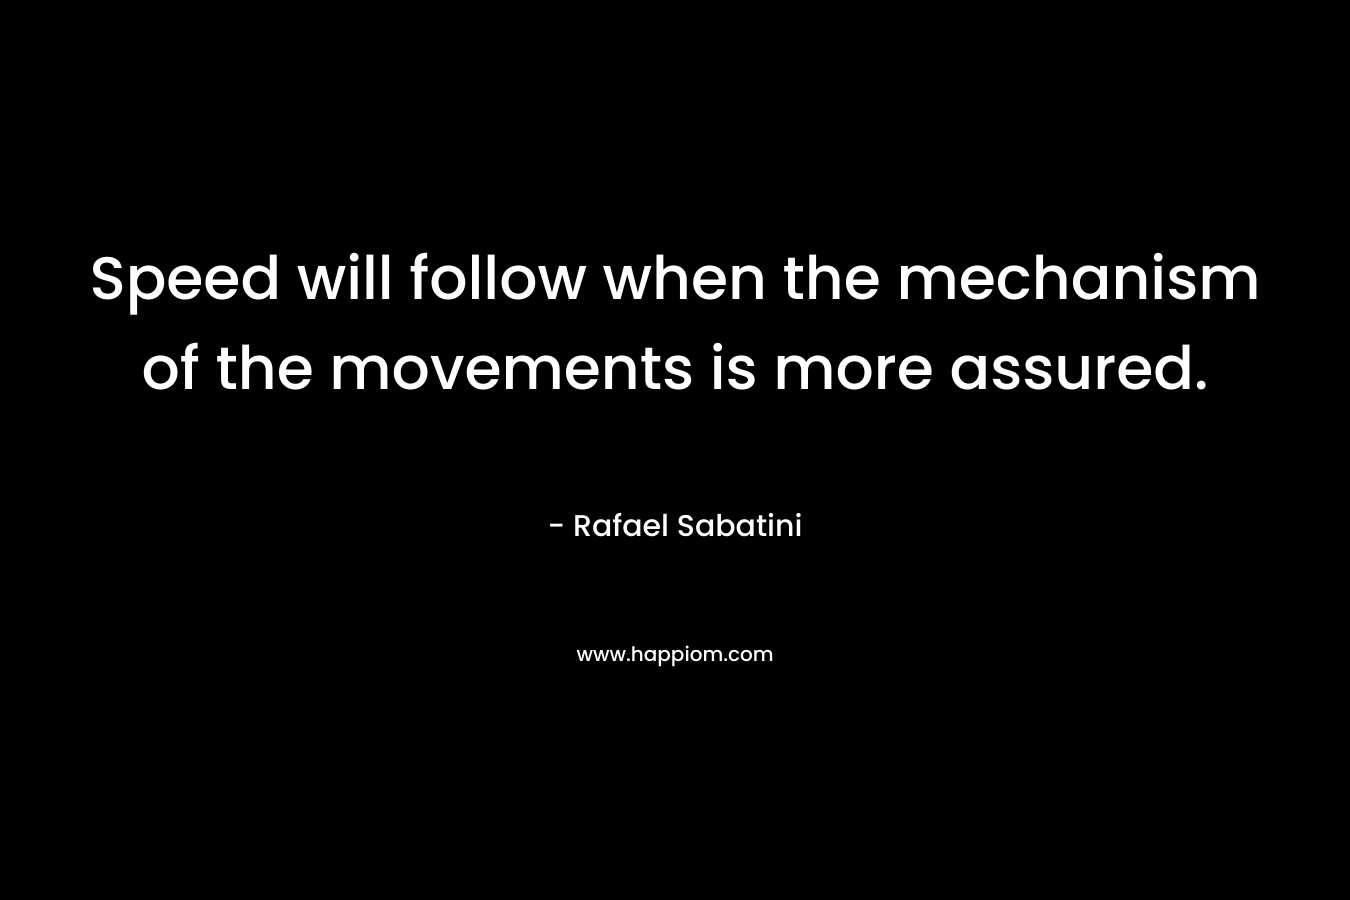 Speed will follow when the mechanism of the movements is more assured.